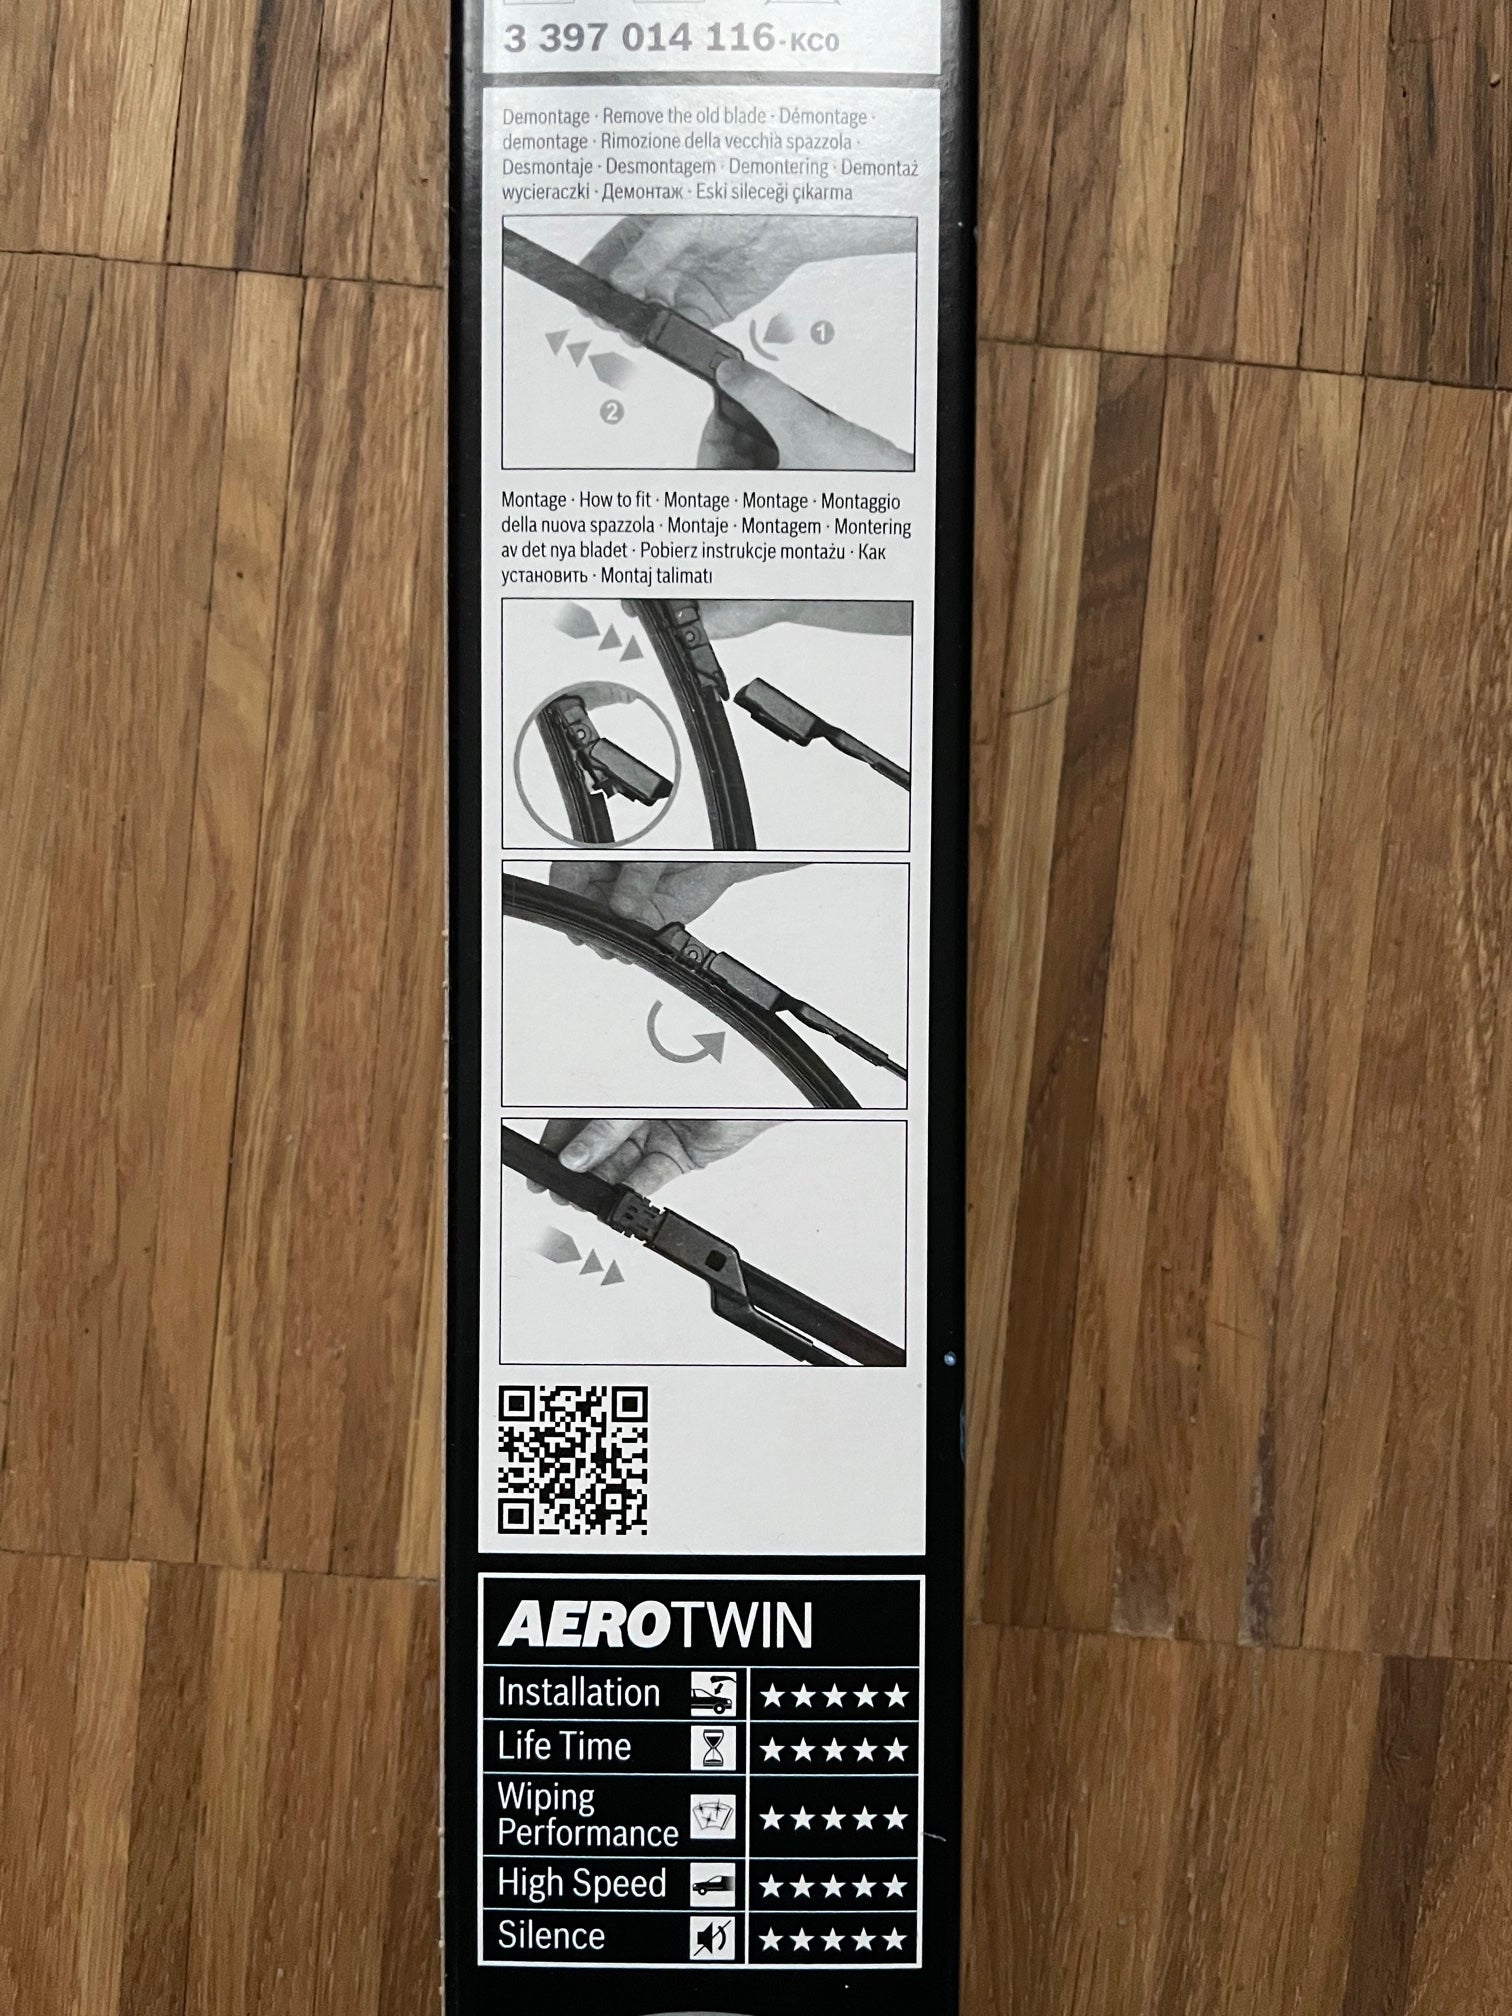 BOSCH AeroTwin A 106 S - Wiper blades for Tesla Model S - 1 pair